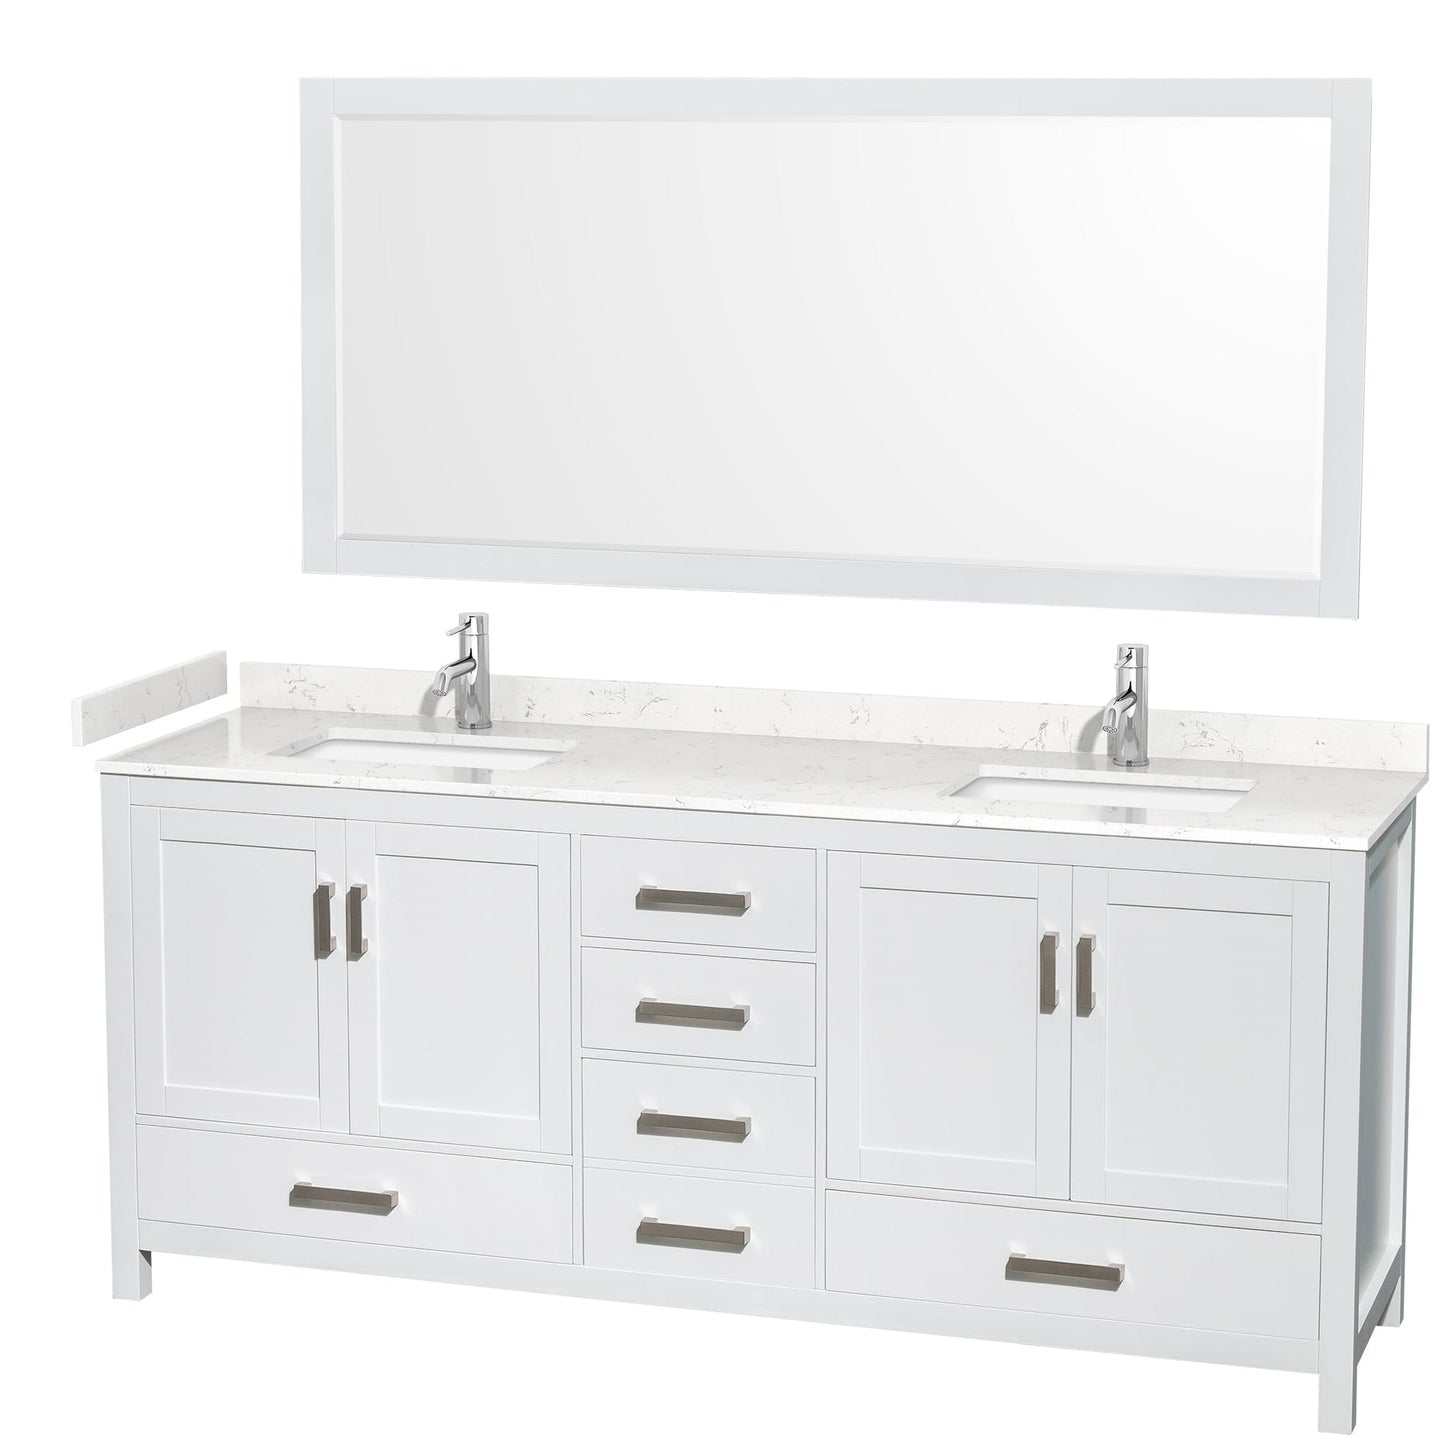 Wyndham Collection Sheffield 80" Double Bathroom Vanity in White, Carrara Cultured Marble Countertop, Undermount Square Sinks, 70" Mirror